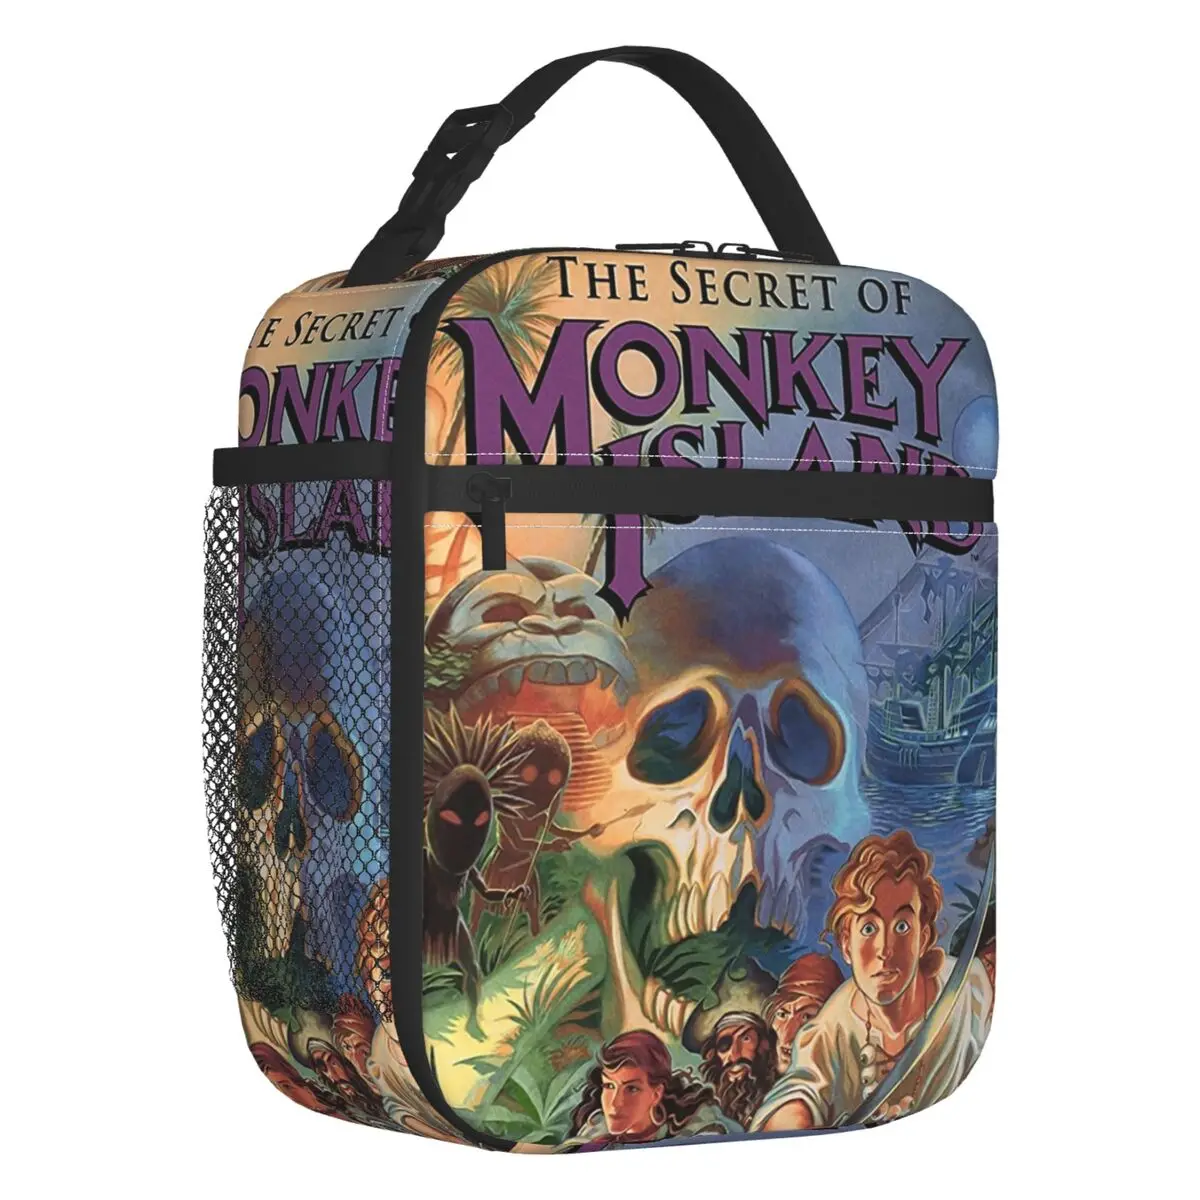 

The Secret Of Monkey Island Portable Lunch Box Women Waterproof Video Games Thermal Cooler Food Insulated Lunch Bag Office Work